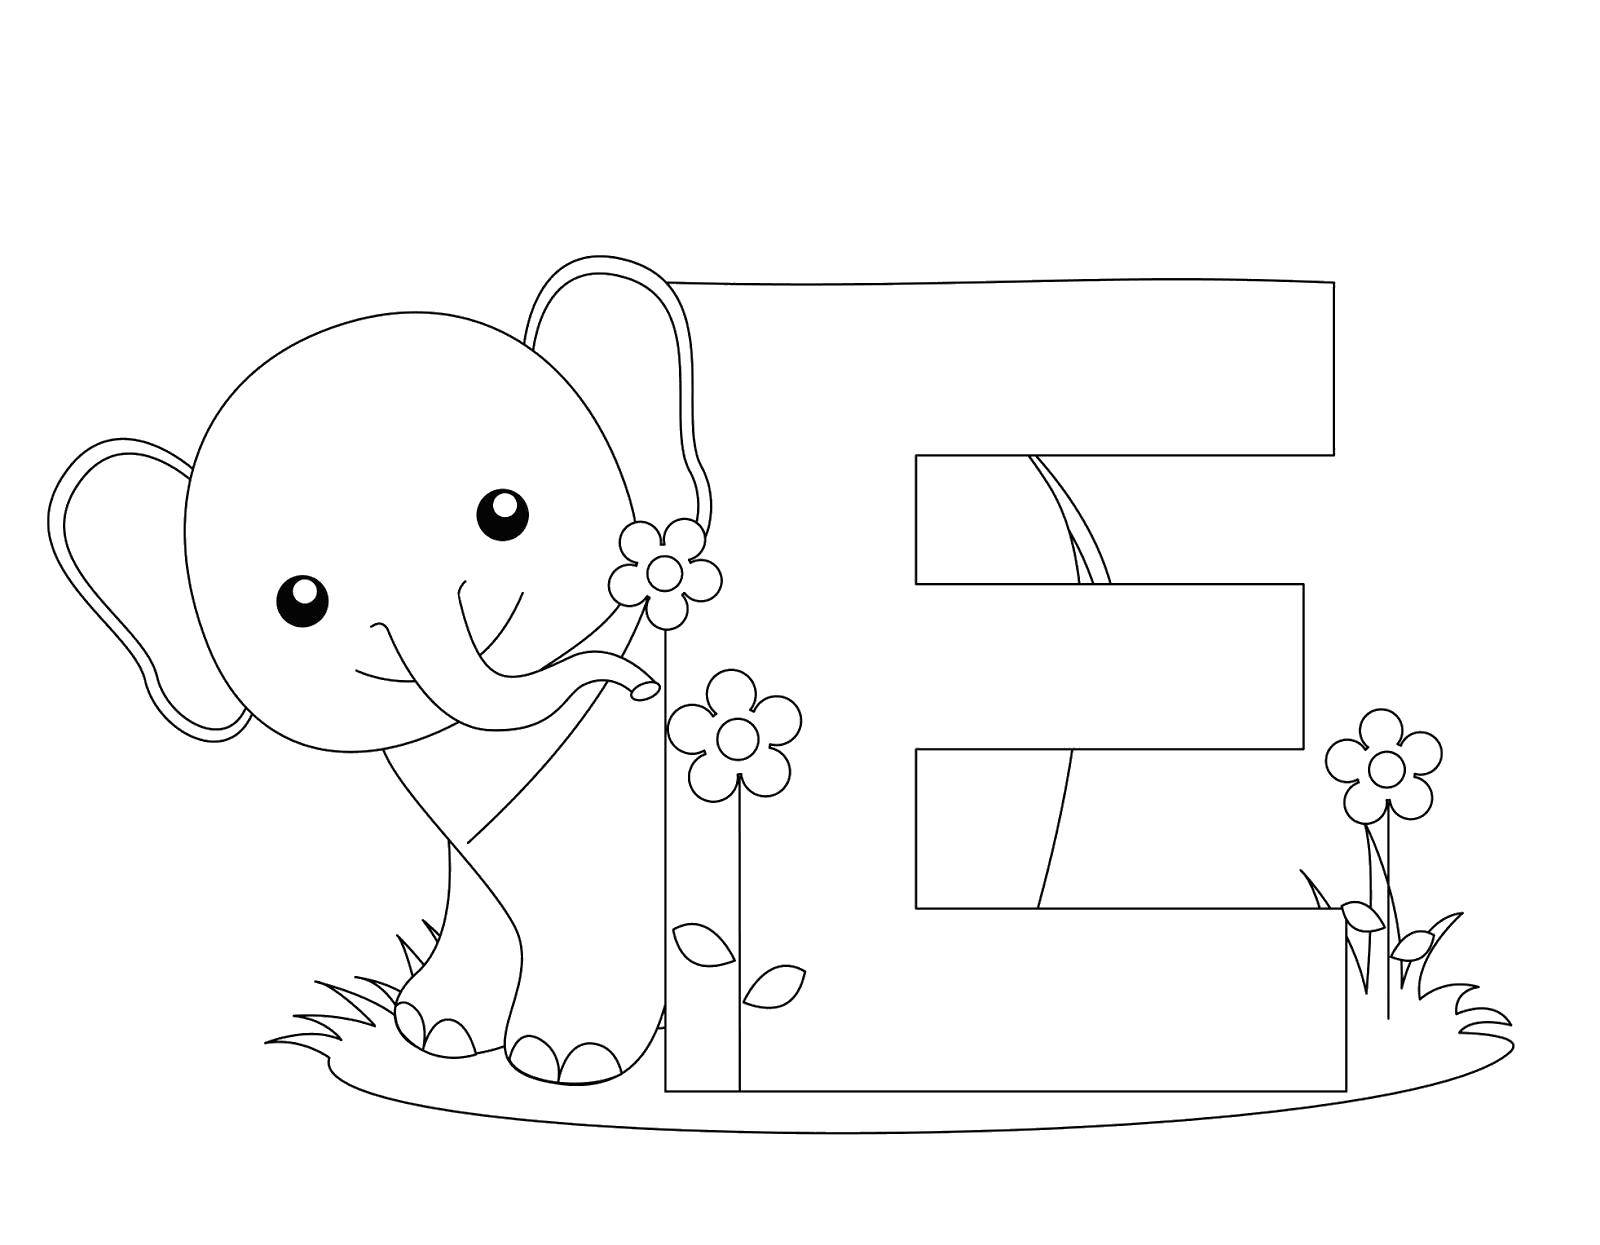 Coloring Elephant with. Category English alphabet. Tags:  The alphabet, letters, words.